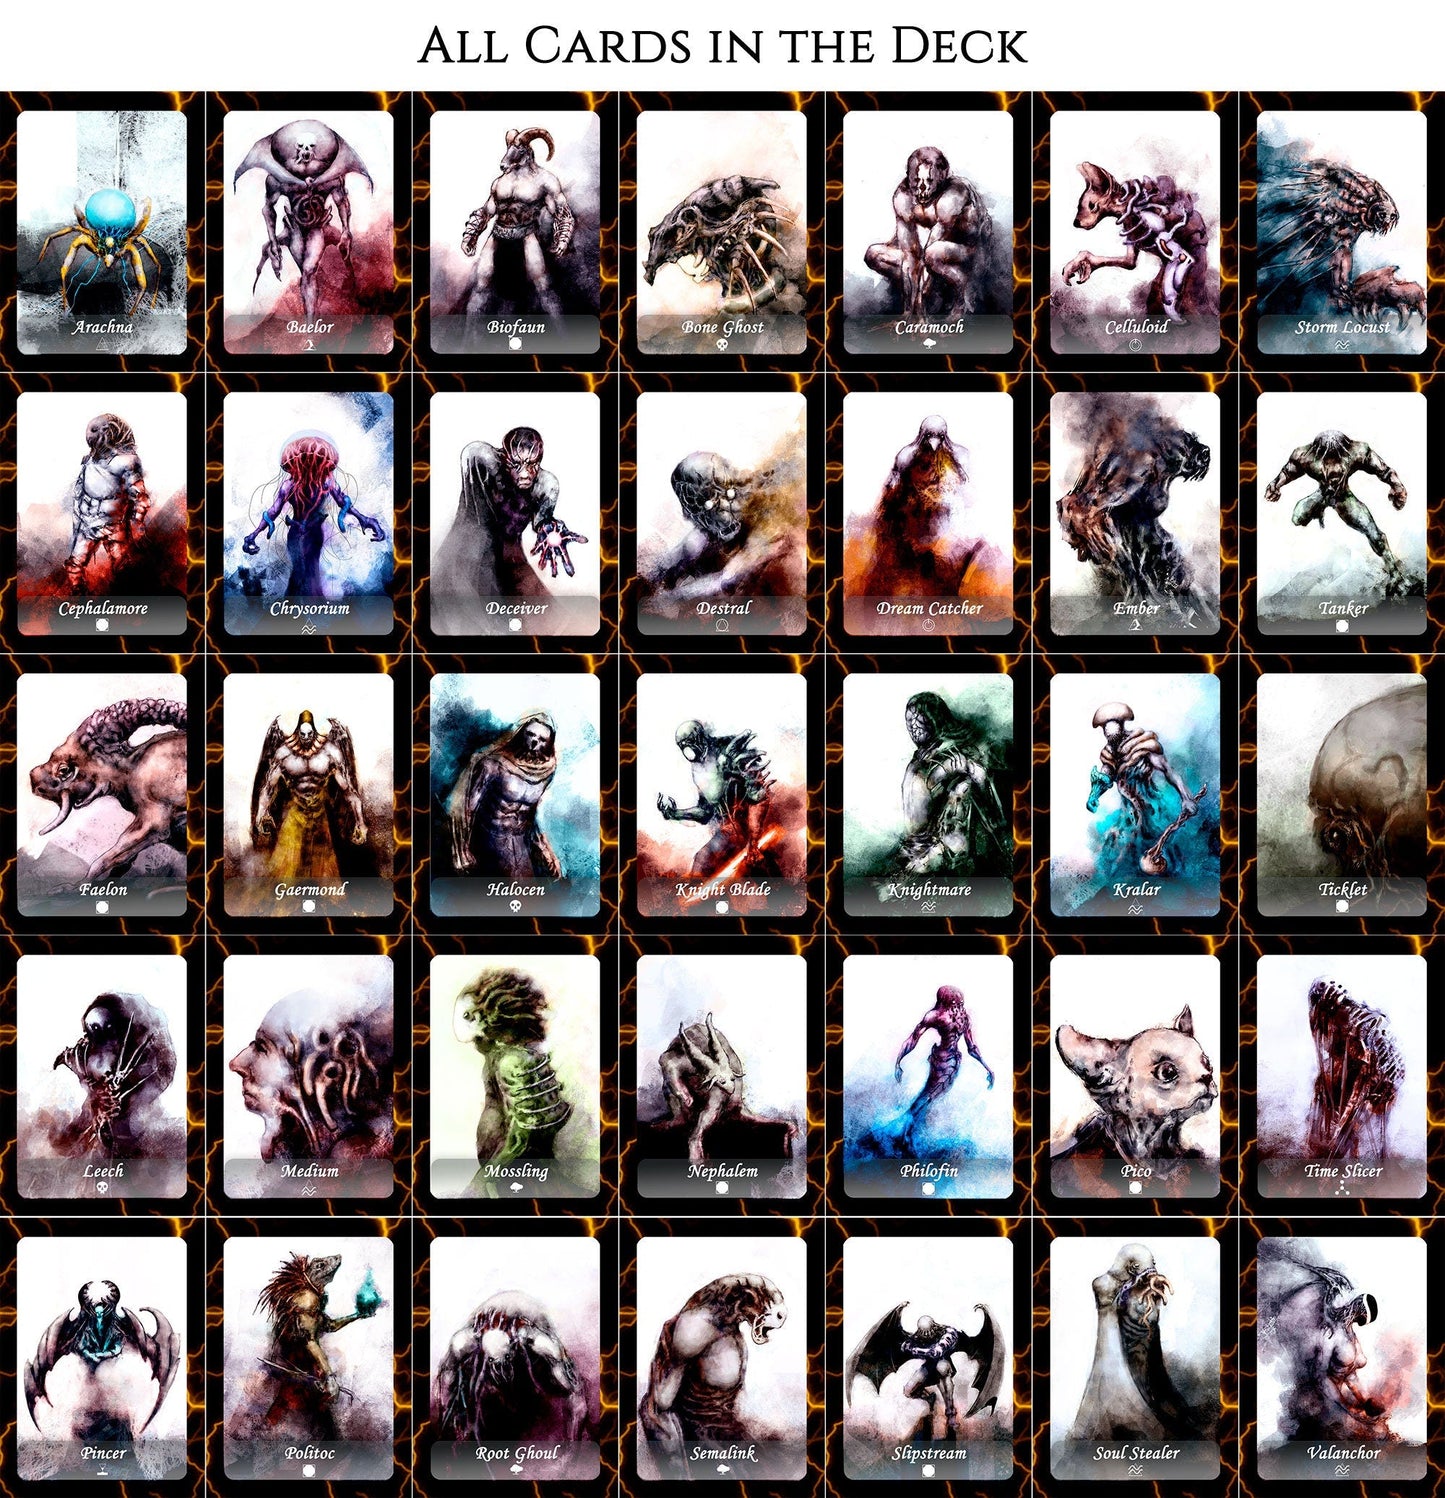 Kalan Deck of 35 Monster Cards and Softcover Guide Book used in DnD and Writing